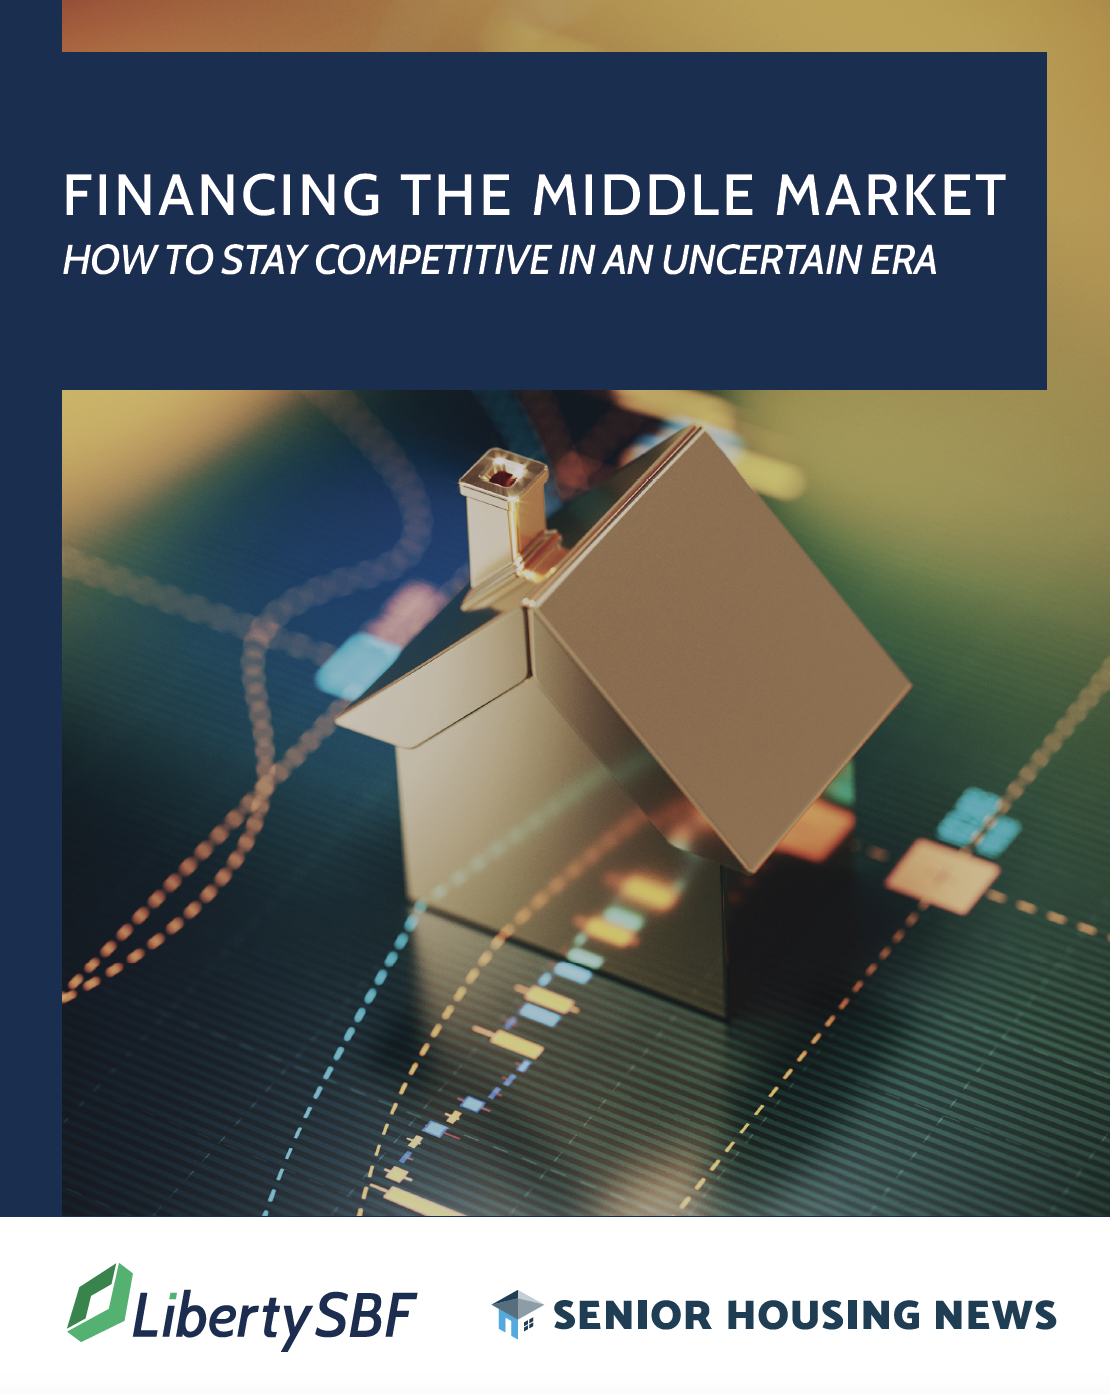 [White Paper] Financing the Middle Market: How to Stay Competitive in an Uncertain Era